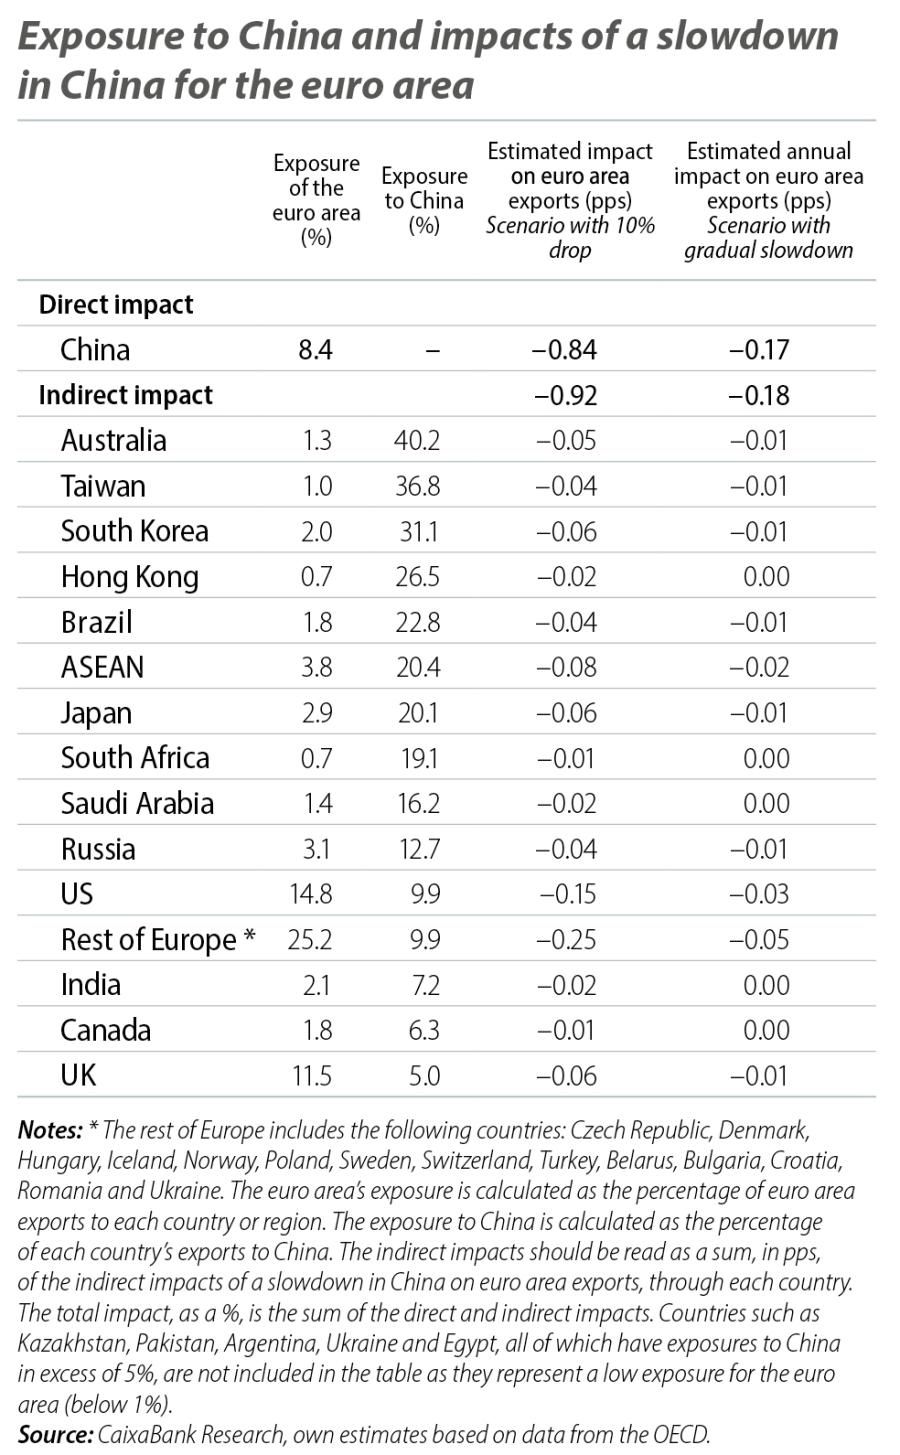 Exposure to China and impacts of a slowdown in China for the euro area